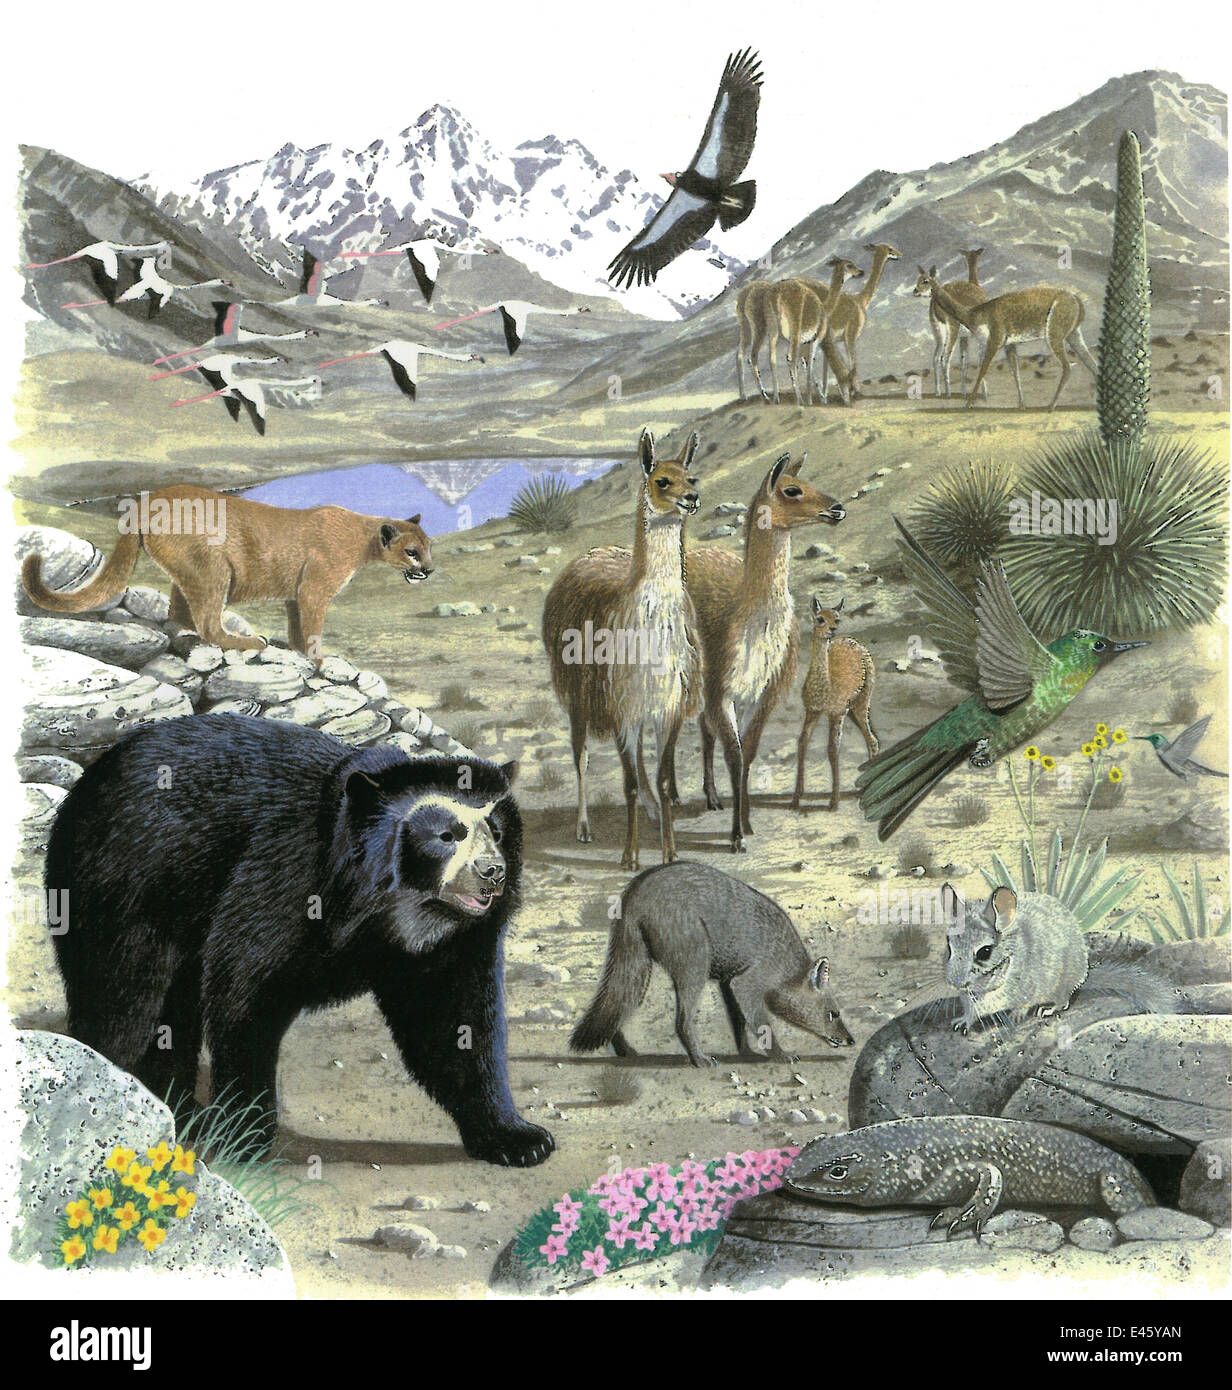 Illustration of wildlife of the Andes: South America Alpaca (Vicugna  pacos), centre; Cougar / Puma / Mountain lion / Mountain cat / Catamount /  Panther (Puma concolor), left; Spectacled / Andean bear (